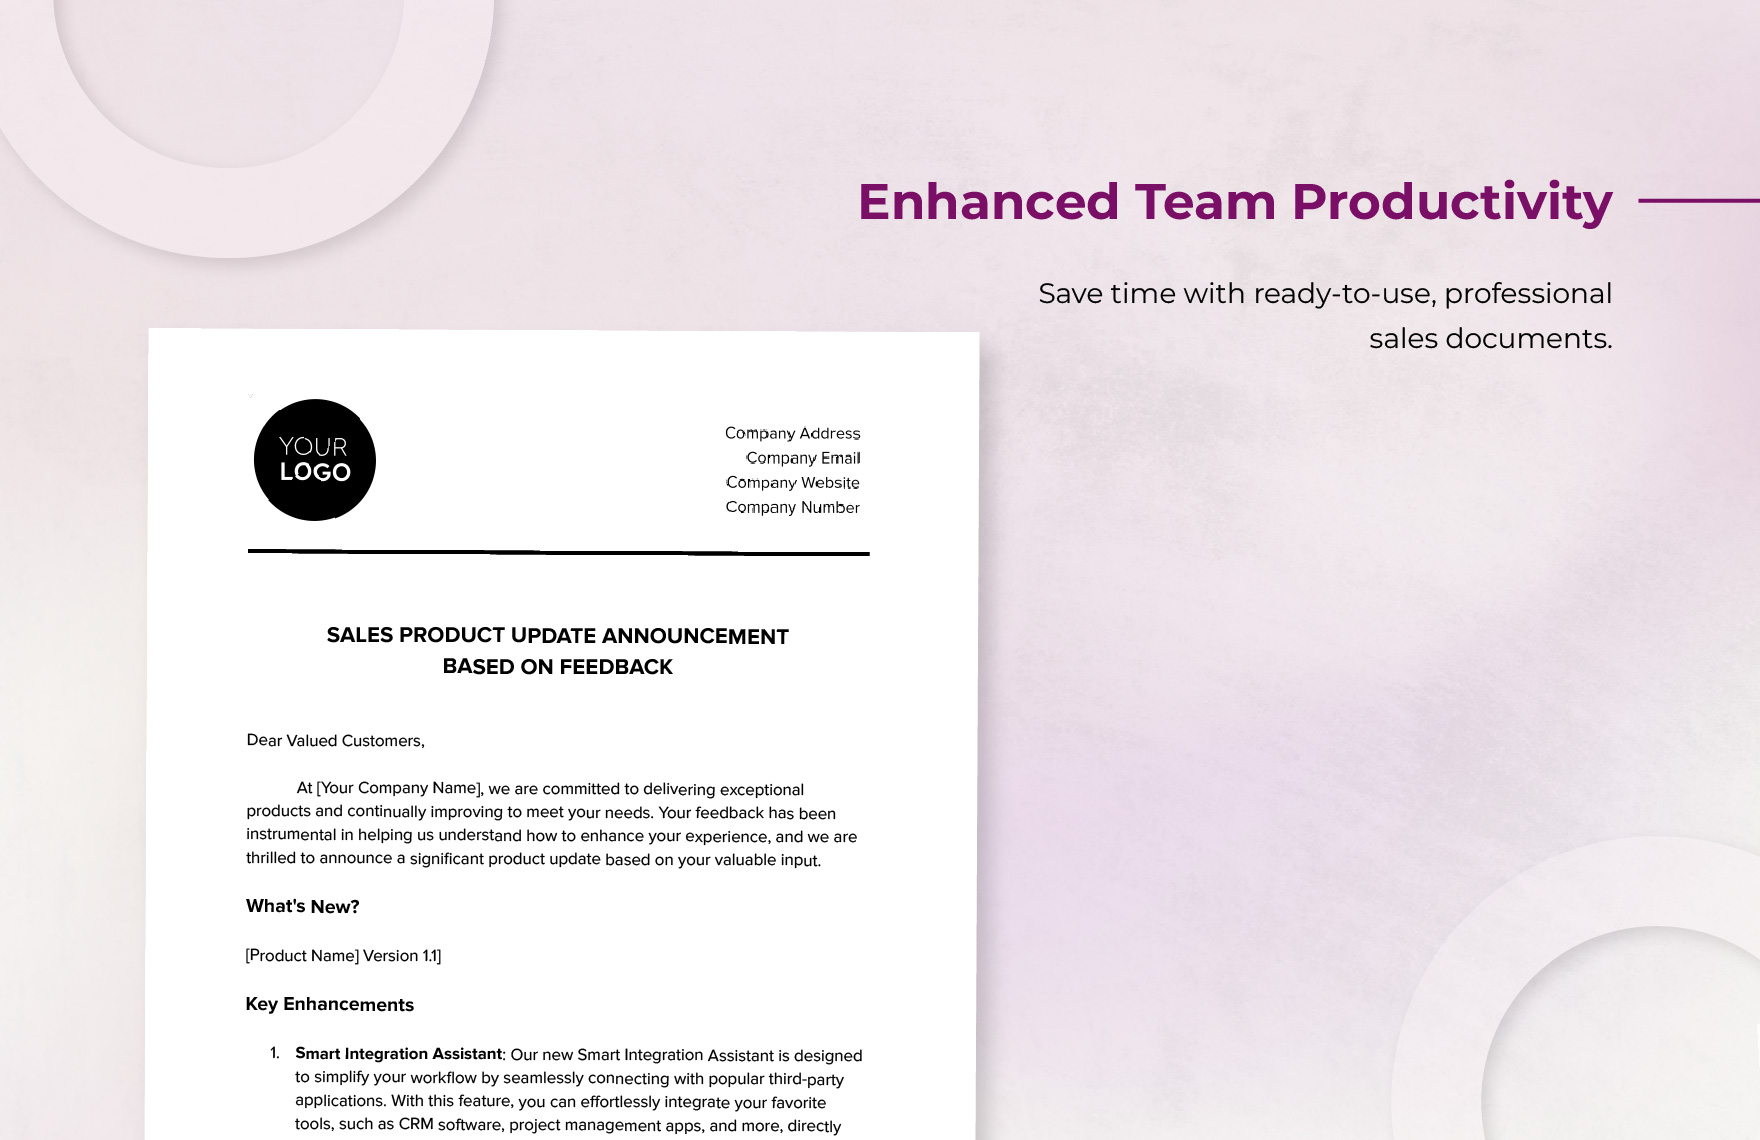 Sales Product Update Announcement Based on Feedback Template